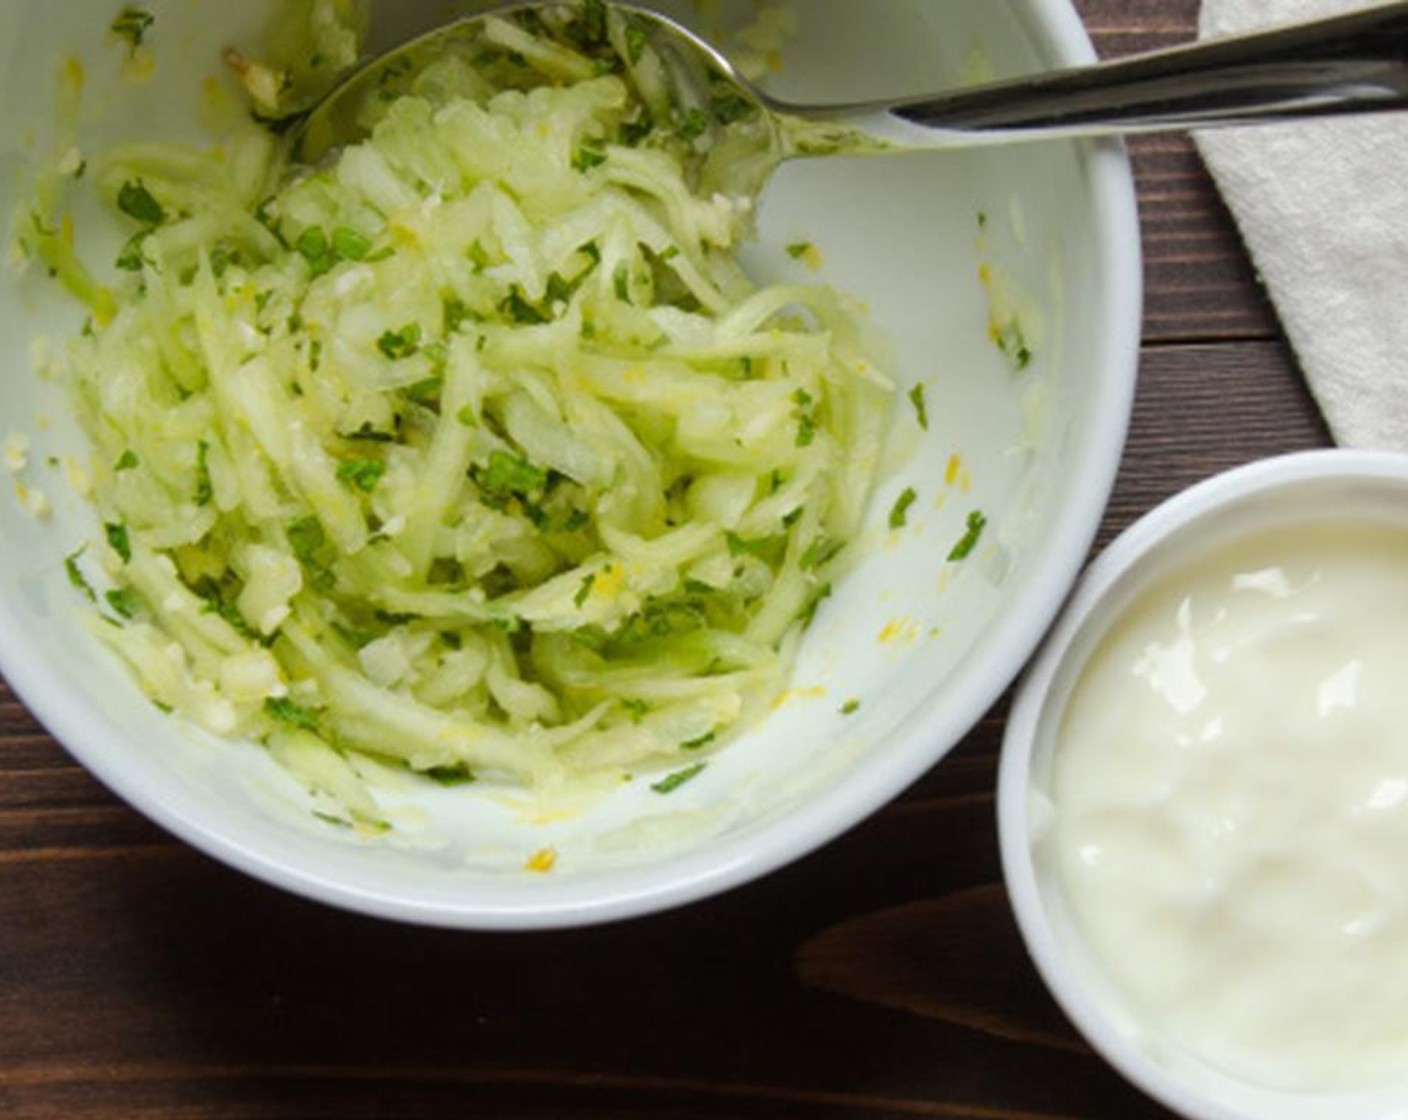 step 13 Combine minced garlic, cucumber, chopped Fresh Mint (1 Tbsp) in a small bowl and stir the mixture. Add the Low-Fat Plain Yogurt (1 cup) and stir to combine. Cover and chill until ready to serve.